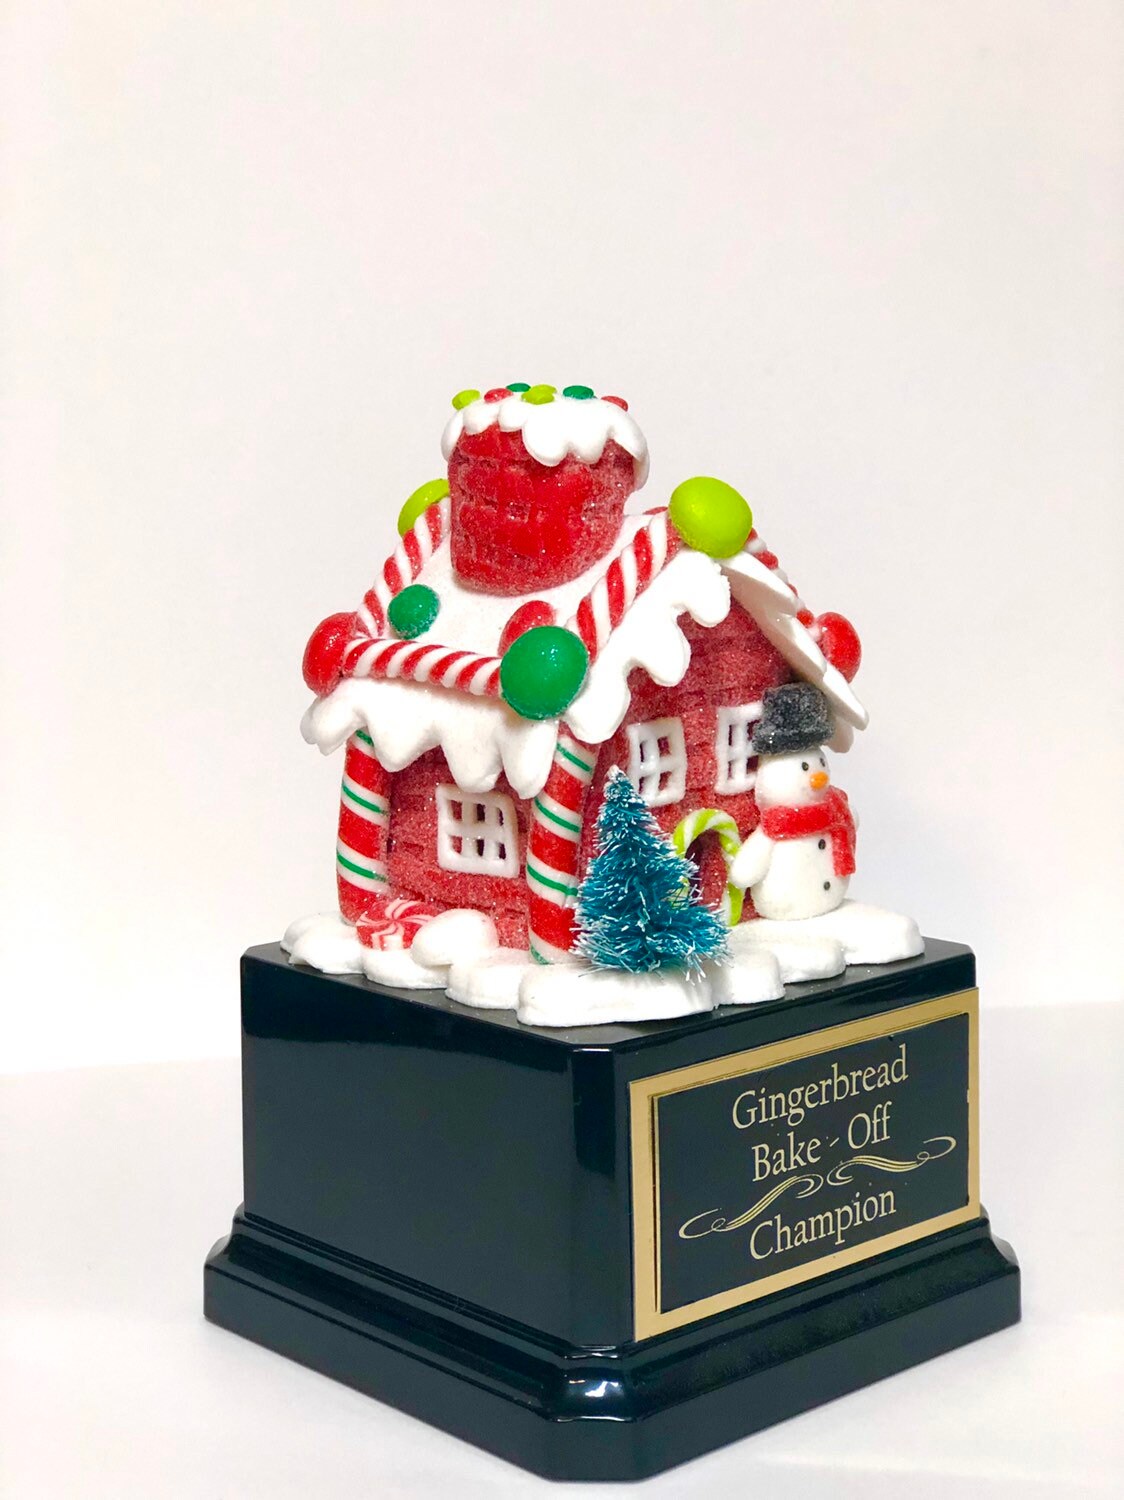 Gingerbread House Cookie Bake Off Trophy Ugly Sweater Trophy Snowman Bottle Brush Tree Christmas Cookie Gingerbread Man Christmas Decor